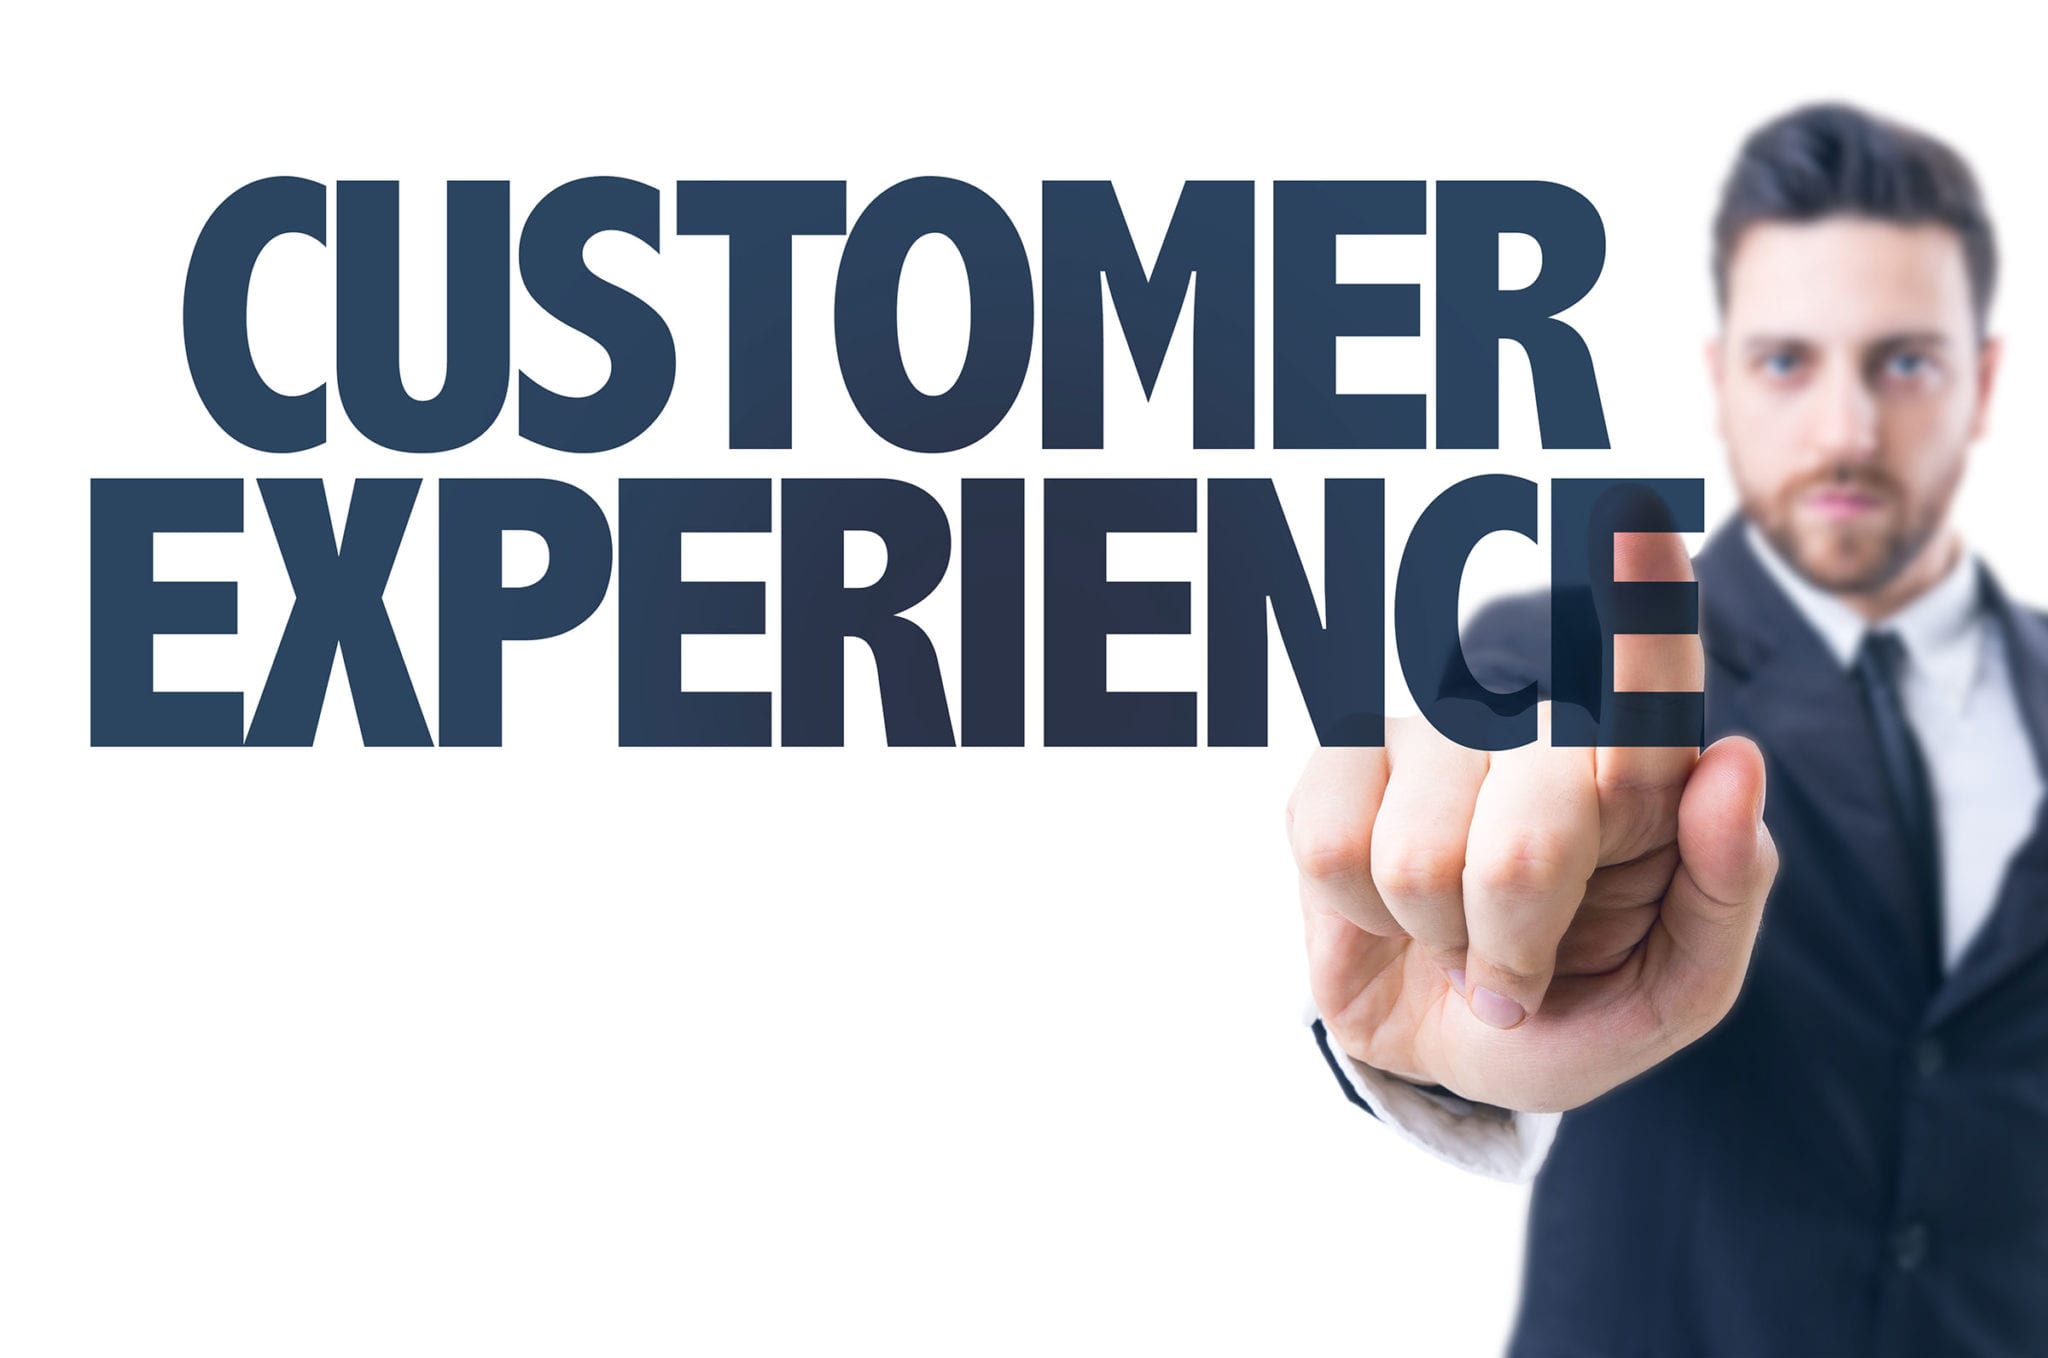 Improve your Customer Experience Through Effective Employee Engagement